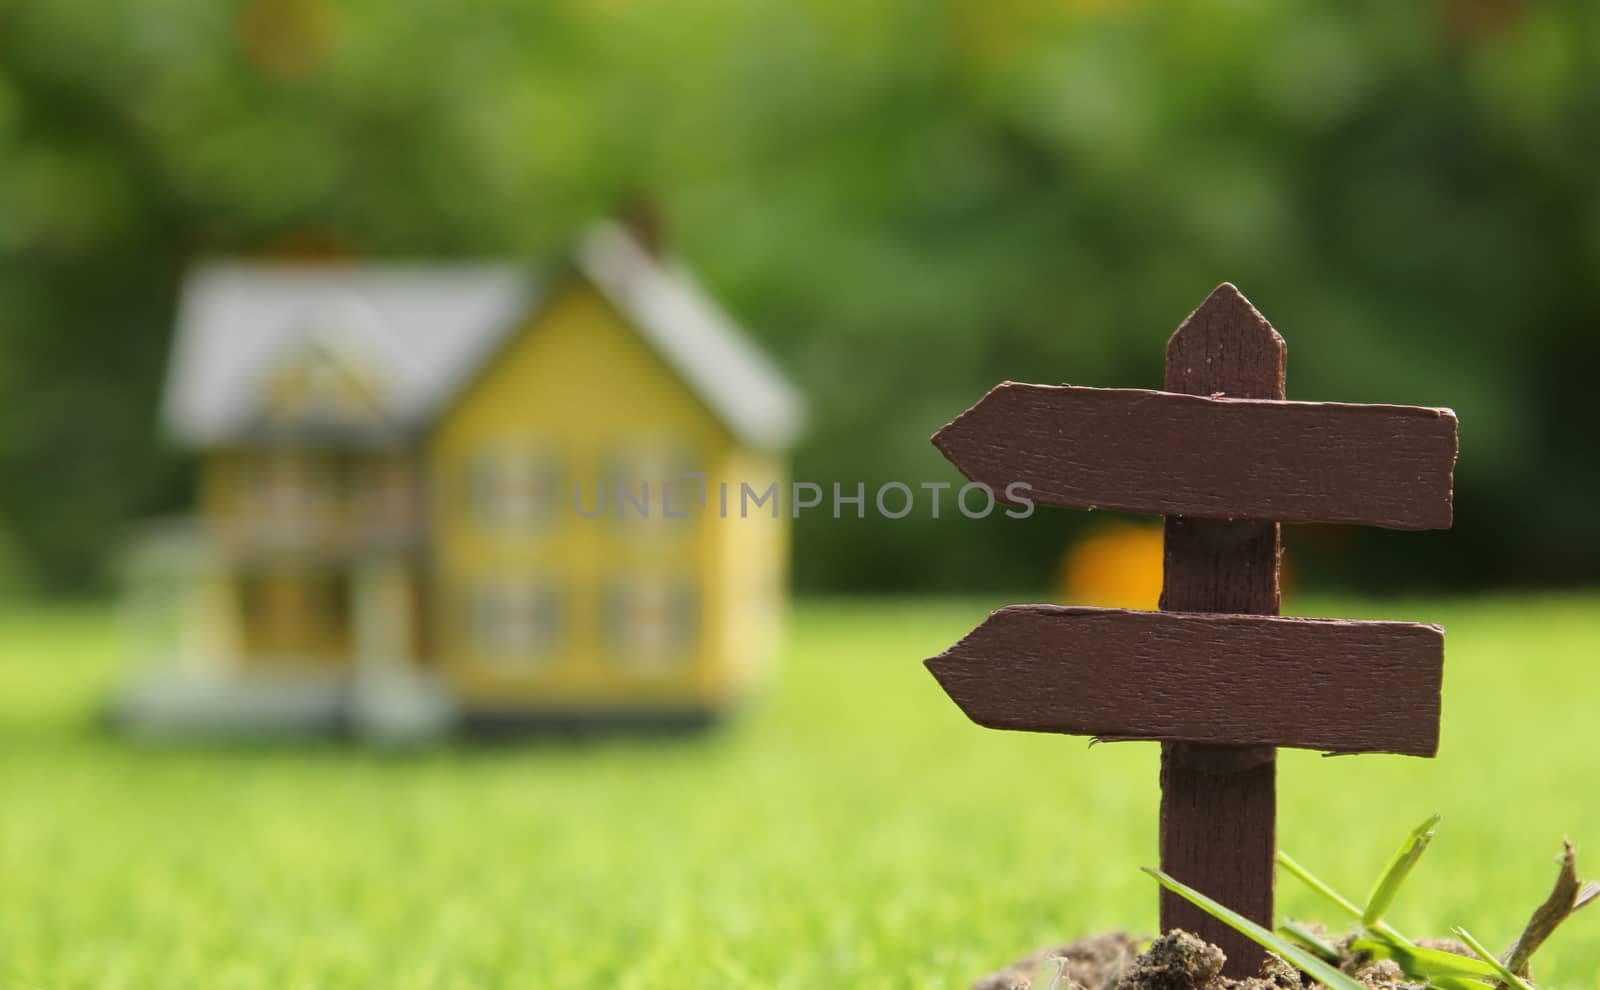 Rustic Signboard in Rural  Outdoor Area, Blurred Farmhouse in background